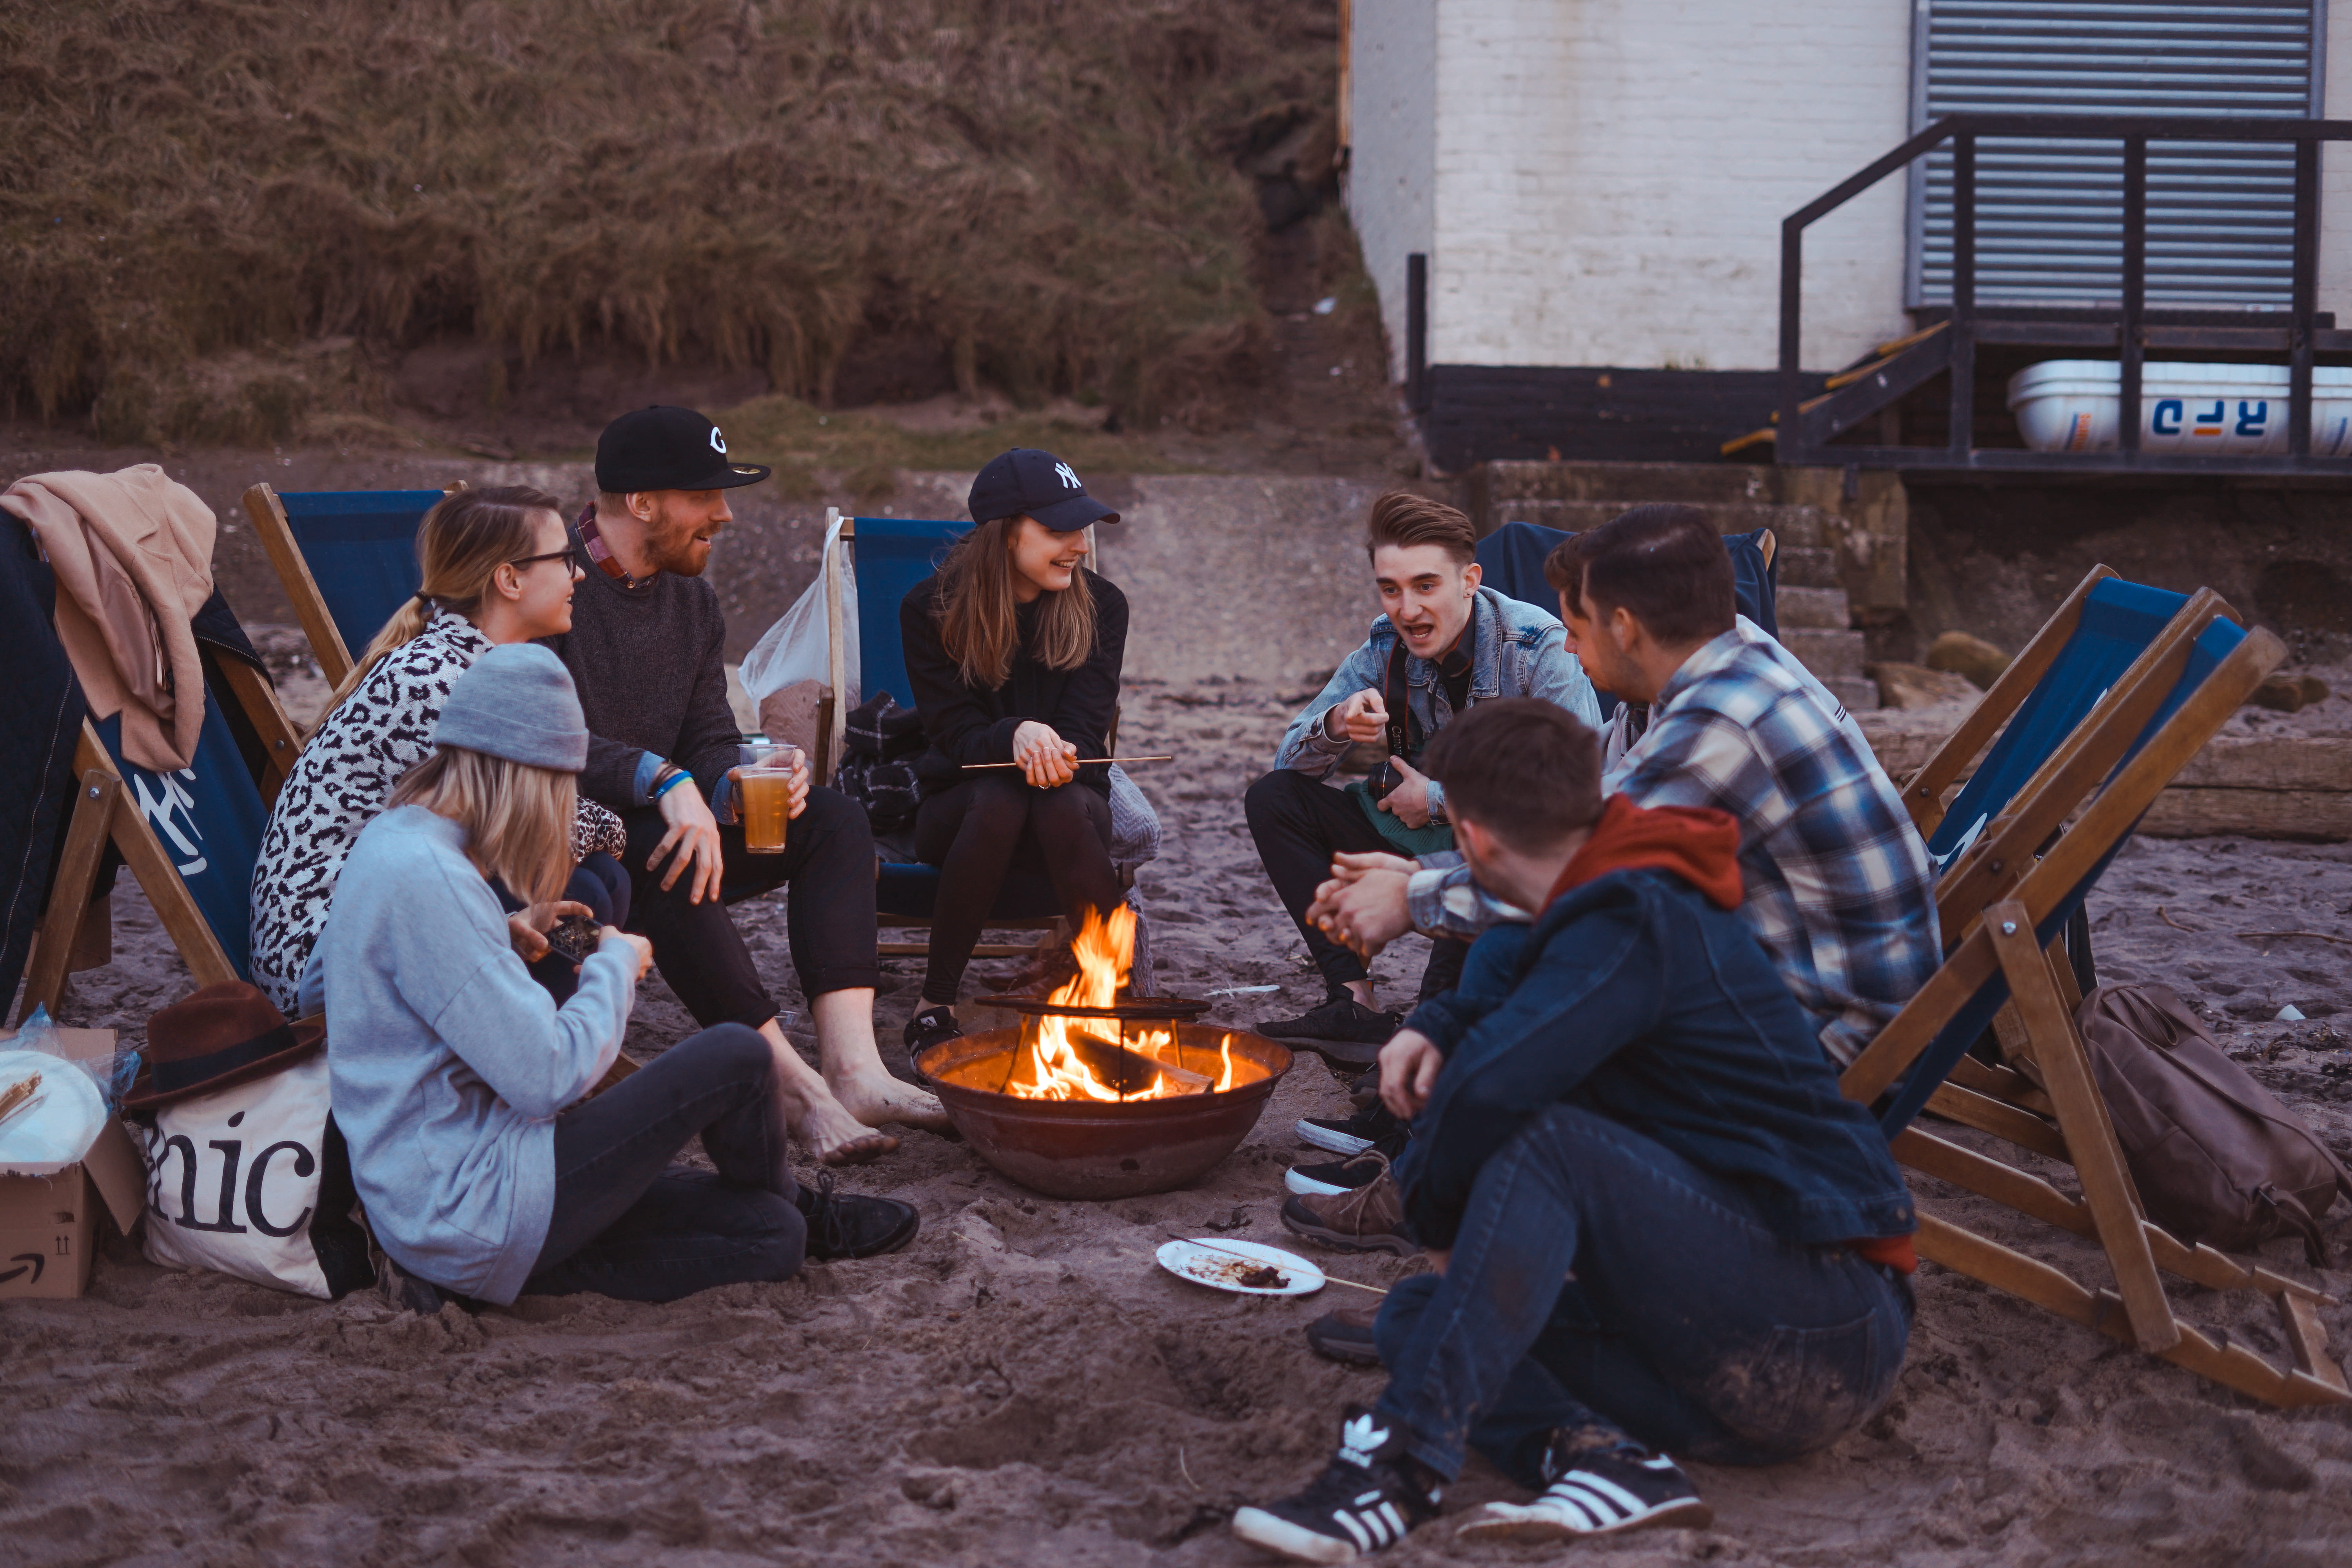 group of people sitting on front firepit, group of people surrounding fire pit